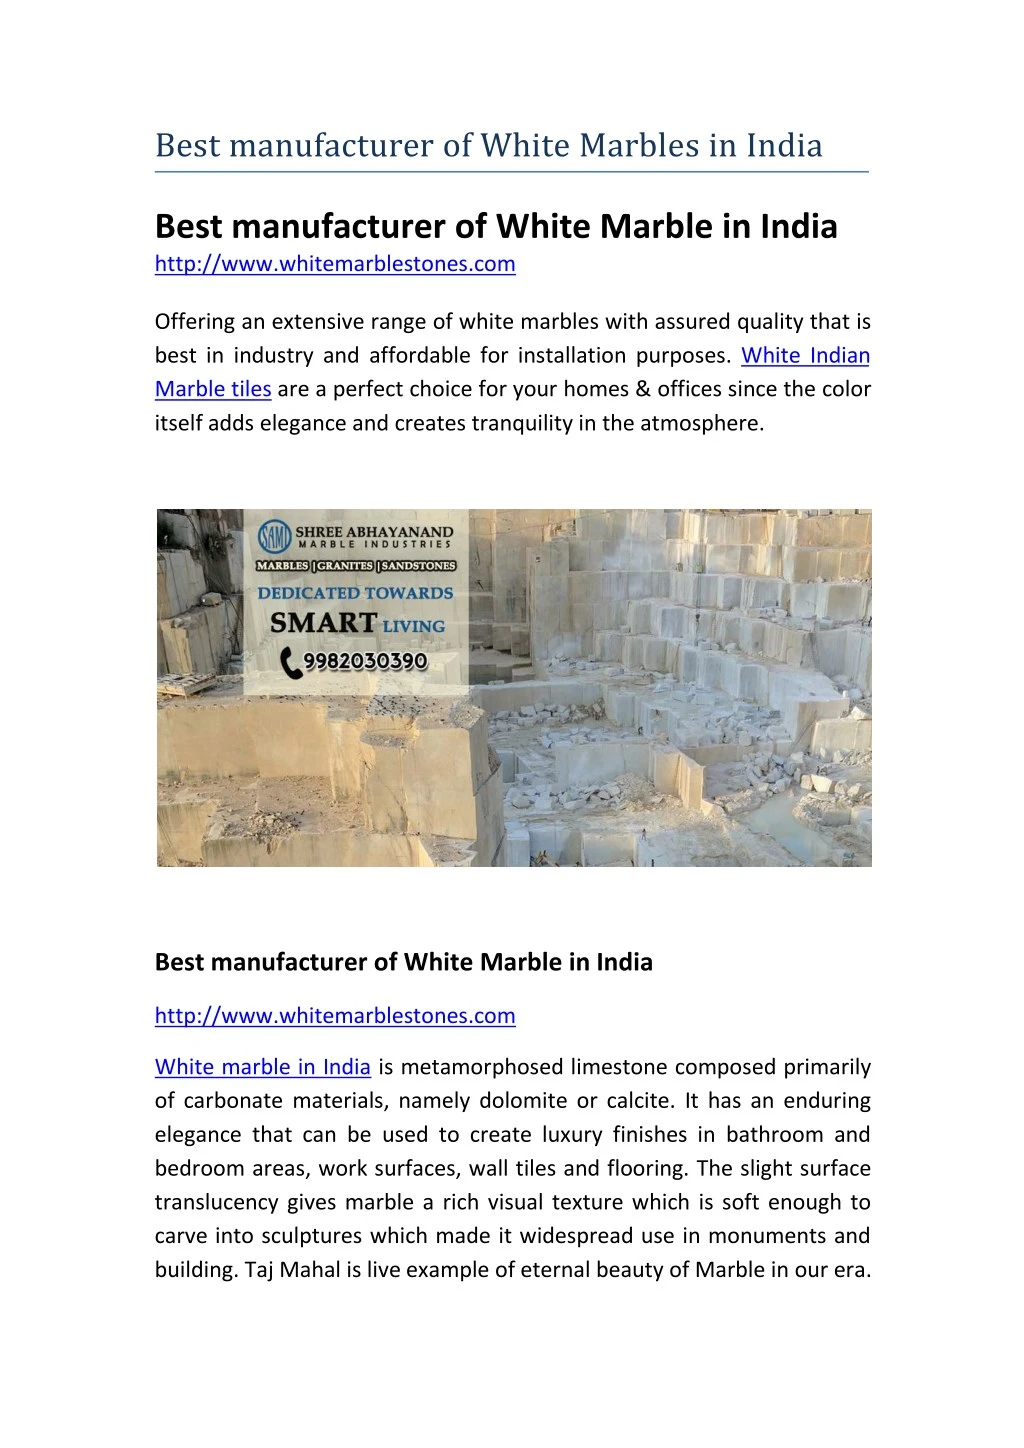 best manufacturer of white marbles in india